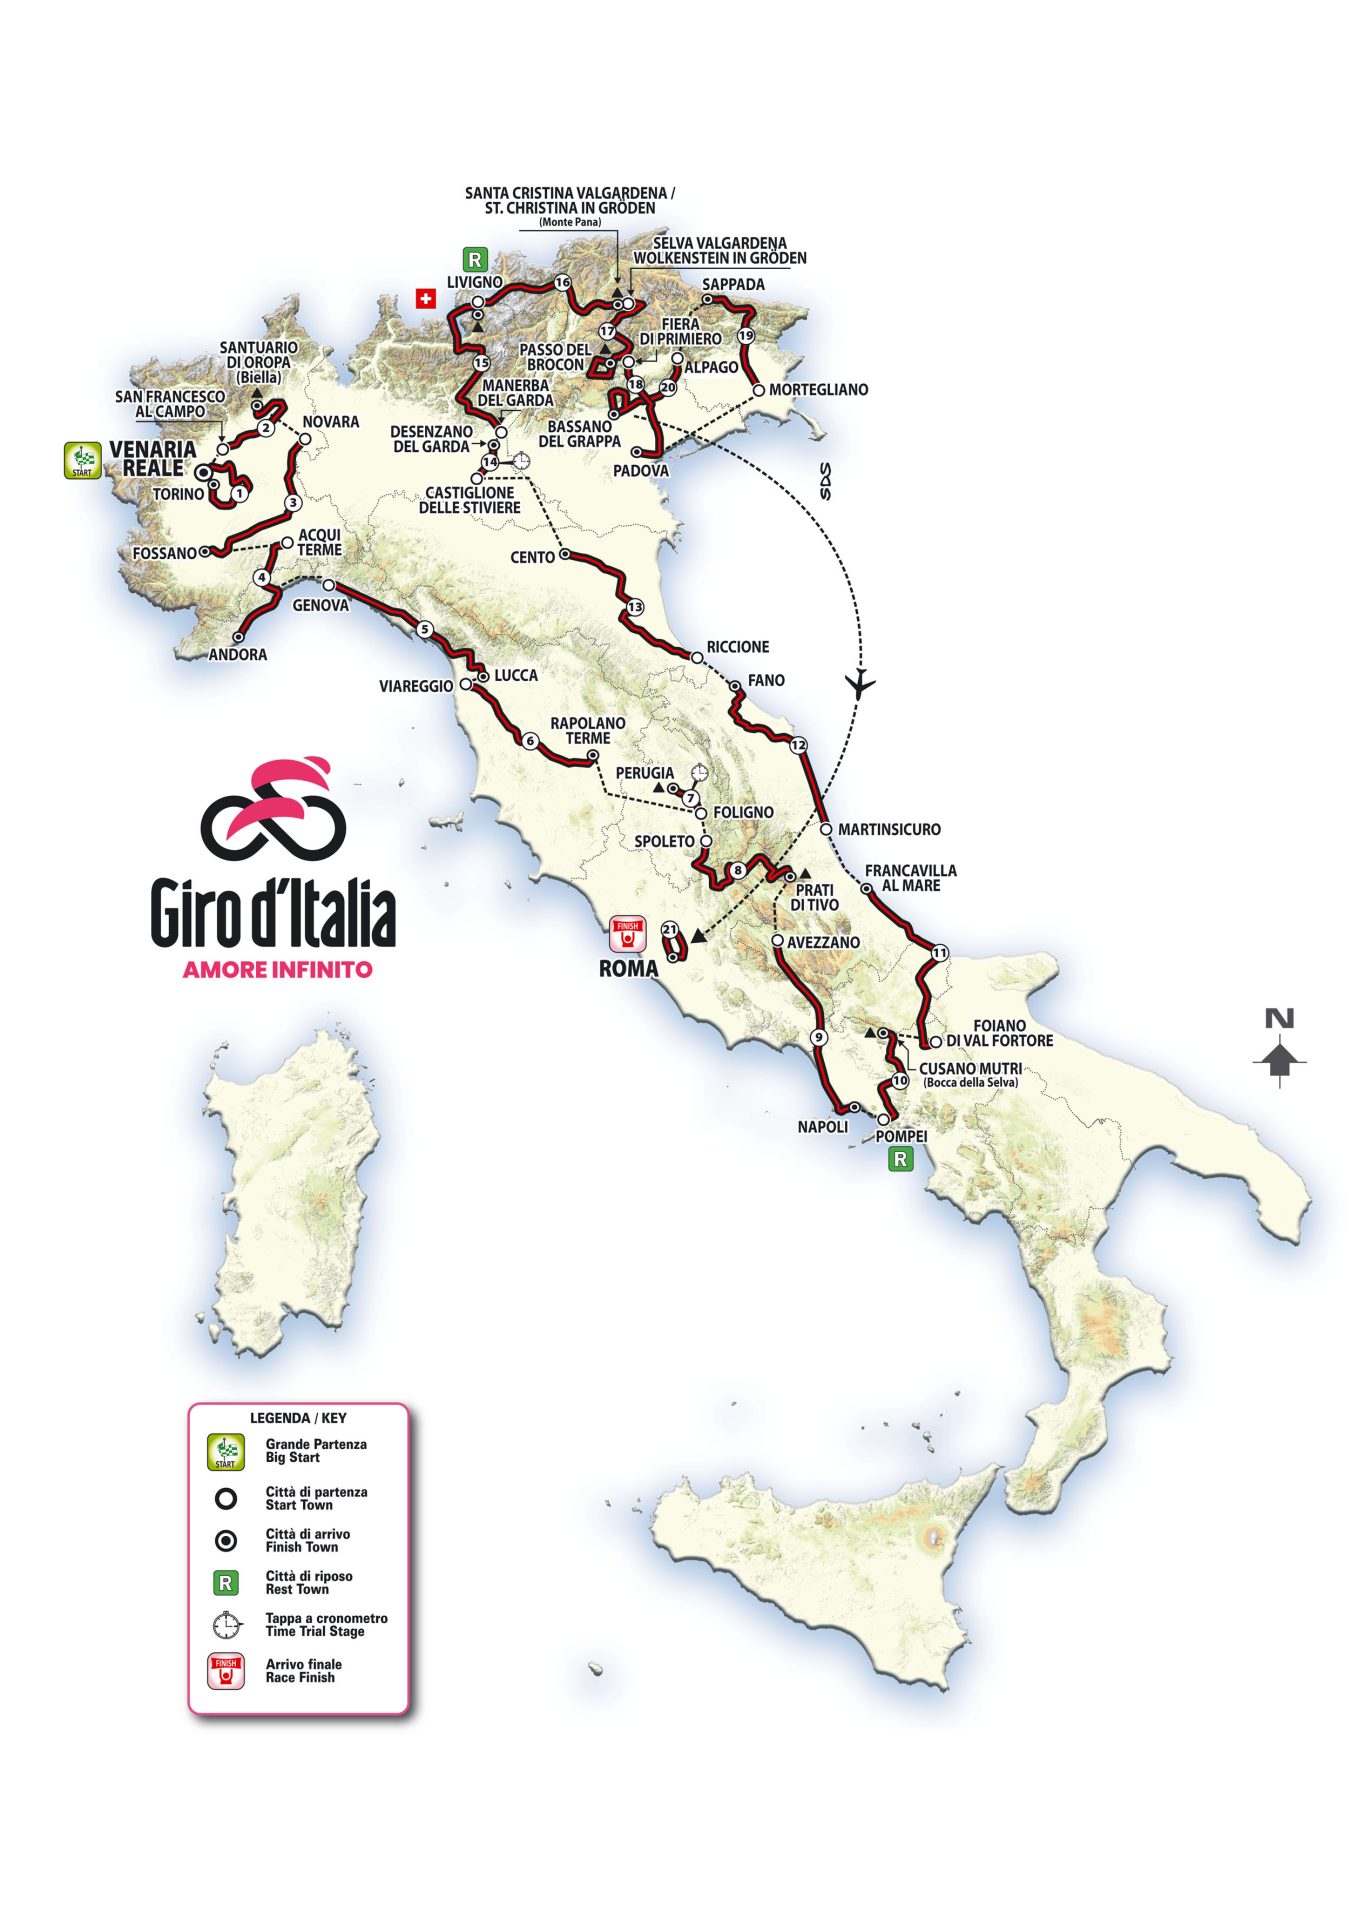 The overall route map of the 2024 Giro d'Italia. The race starts near Turin in Venaria Reale and goes south along the Tirrenian coast to Tuscany and the Naples region before winding back up the Adriatic side to the Dolomites and Veneto region.